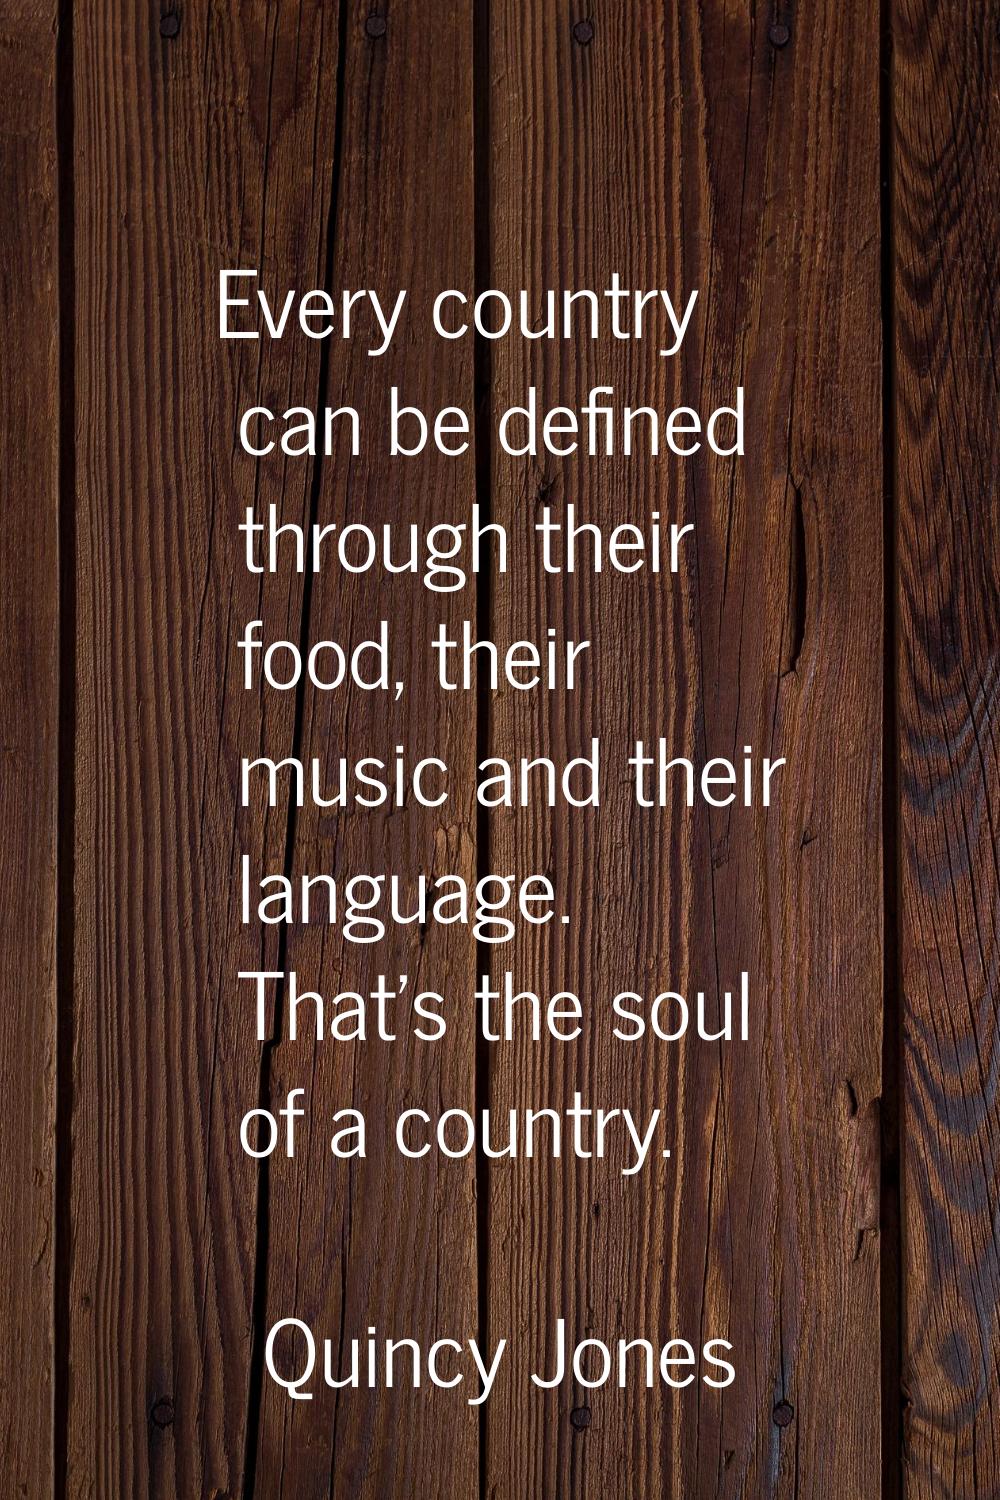 Every country can be defined through their food, their music and their language. That's the soul of